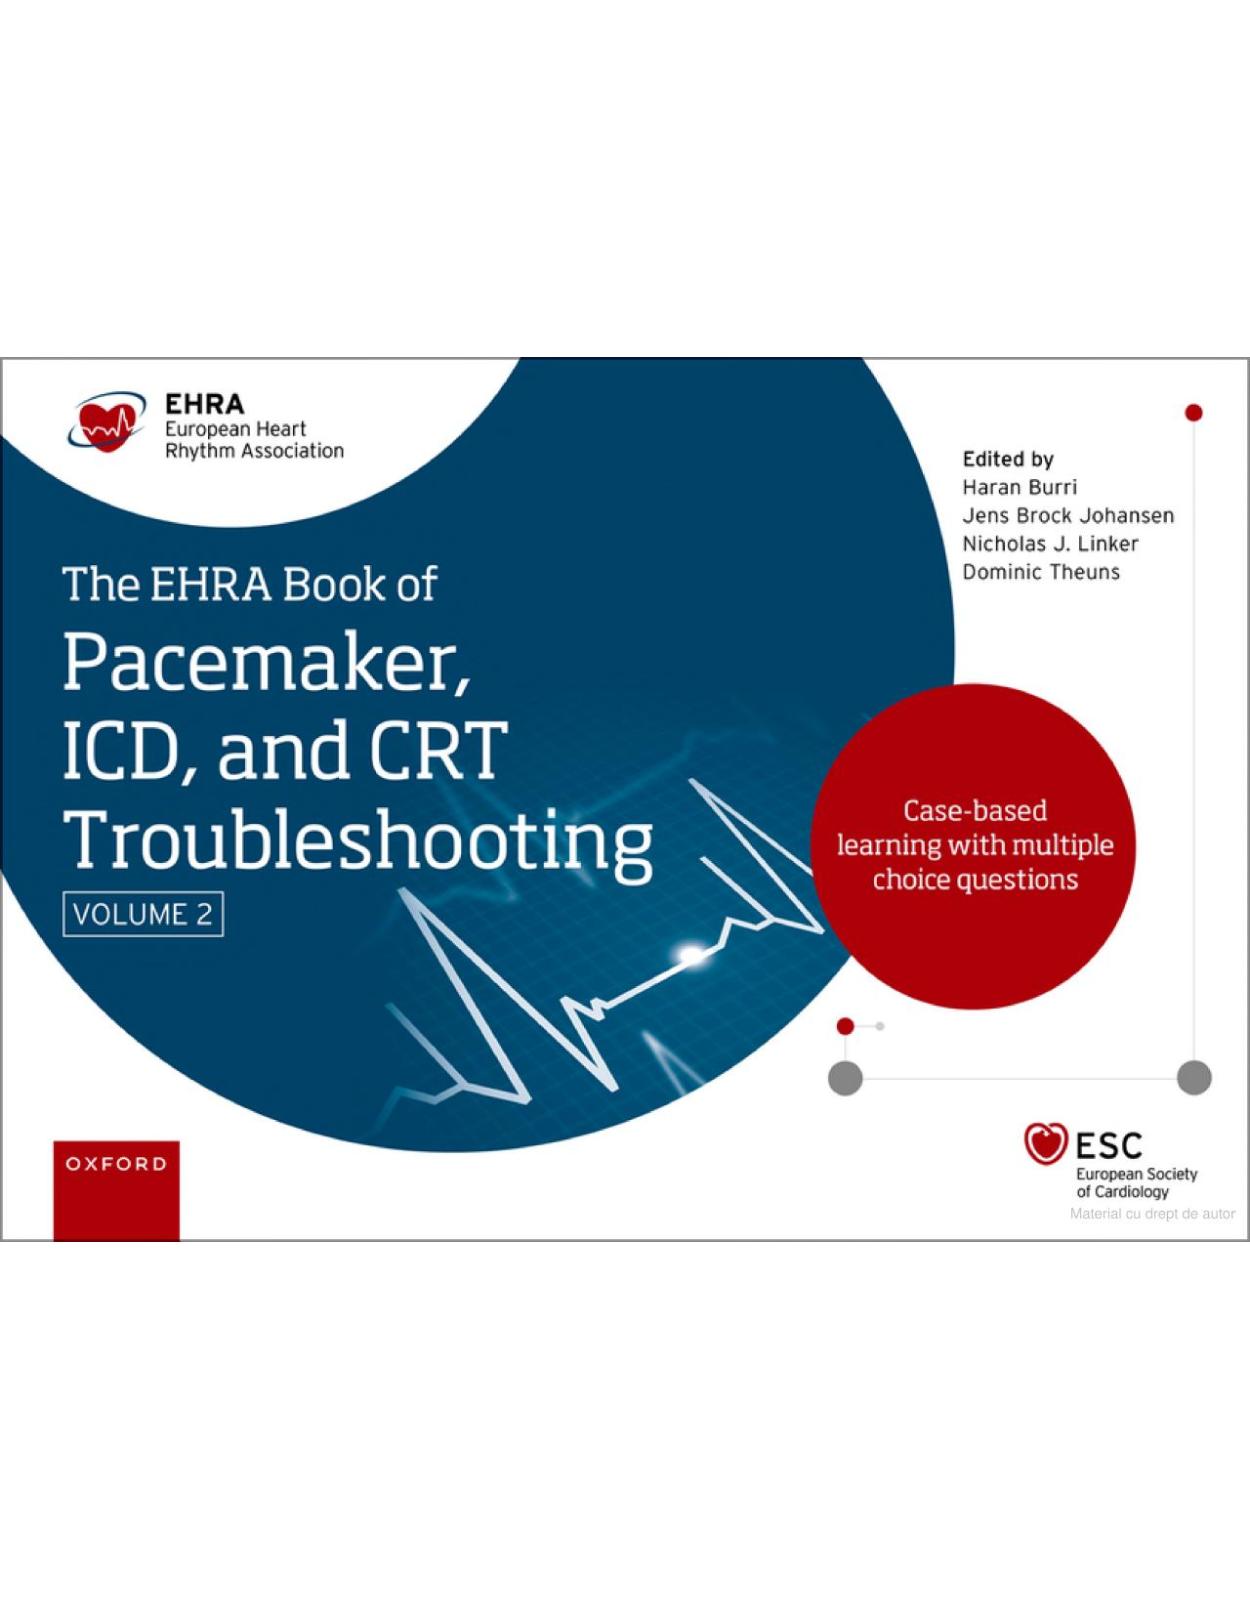  See this image The EHRA Book of Pacemaker, ICD and CRT Troubleshooting Vol. 2